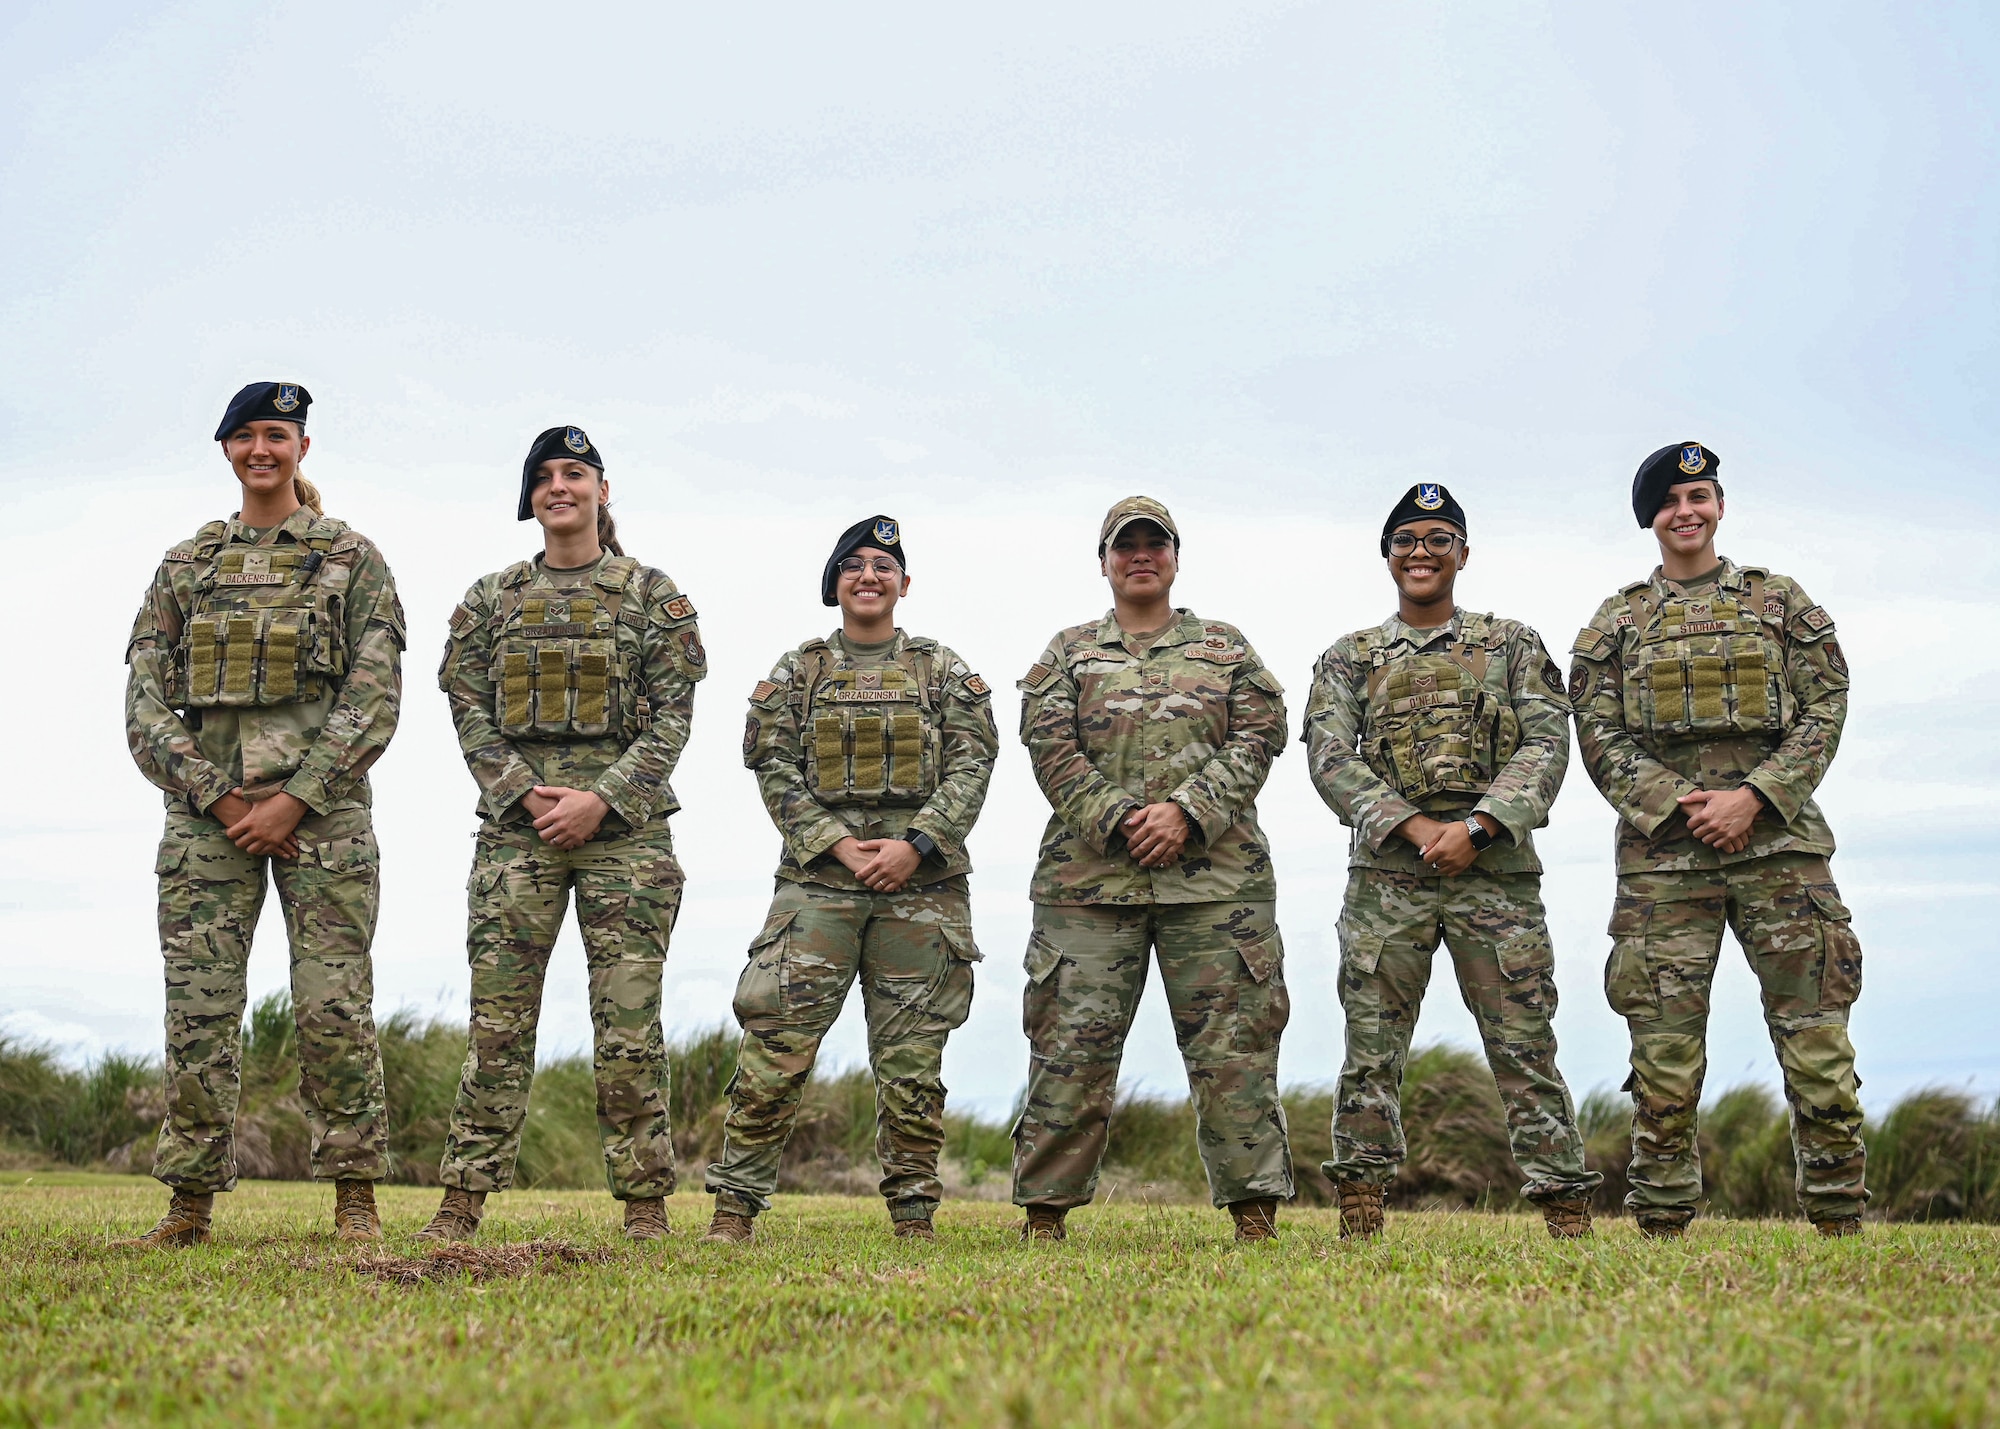 Female defenders from the 36th Security Forces Squadron stand united with Senior Master Sgt. Jeanette Warr, the 36th Wing Equal Opportunity director and prior defender, at Andersen Air Force Base, Guam, April 6, 2023. Although Warr is not in the daily grind with defenders anymore, as an EO director Warr is able to embed during commander calls, host trainings and teach squadron positive communication techniques while building trust with one another, and most importantly be known on the base so she can help those who need it. (U.S. Air Force photo by Staff Sgt. Aubree Owens)